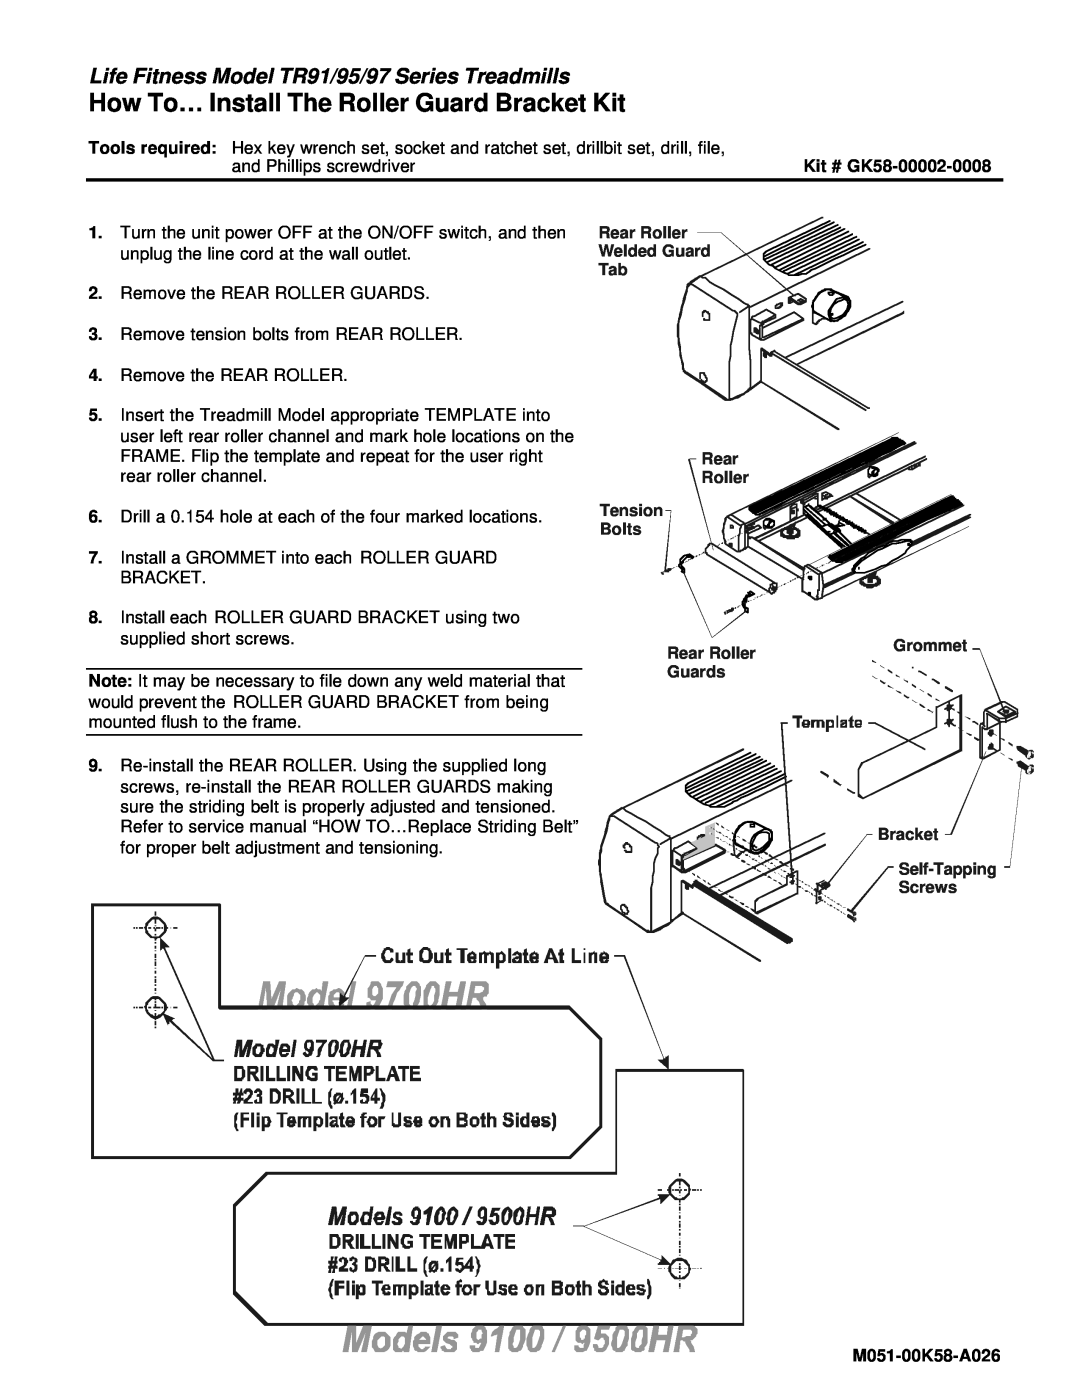 Life Fitness TR91/95/97 service manual How To… Install The Roller Guard Bracket Kit, and Phillips screwdriver 